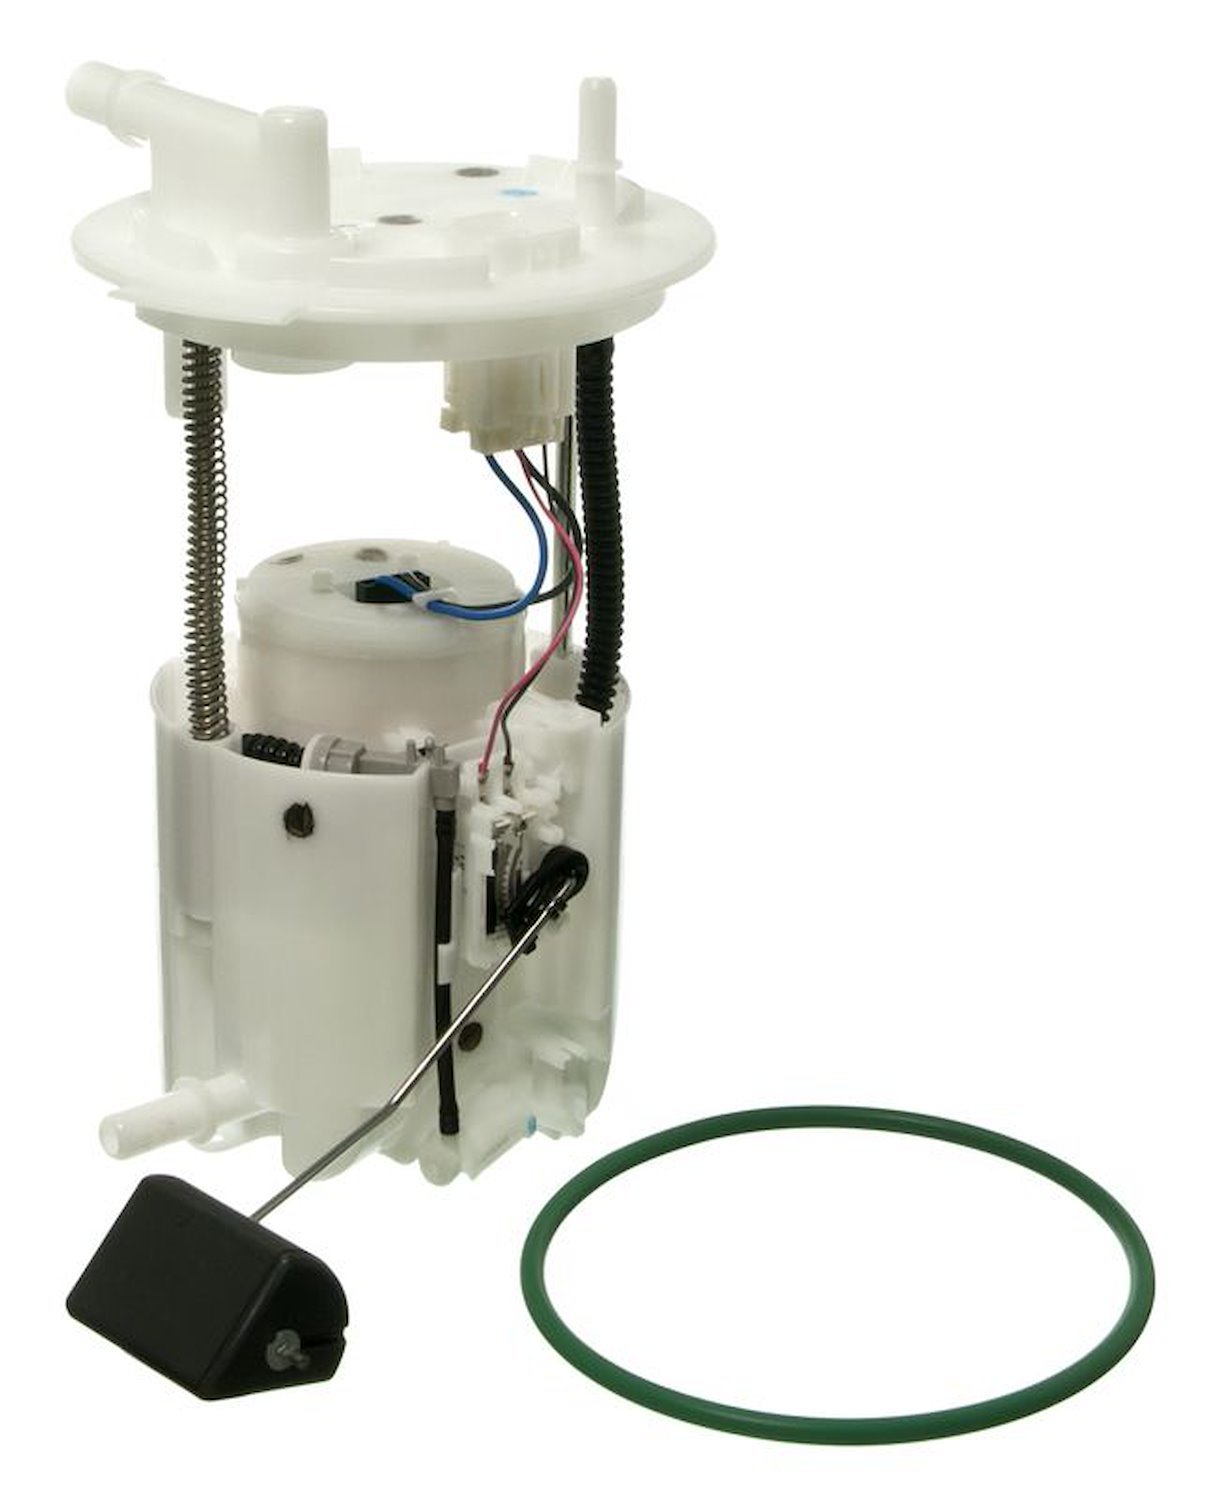 OE Ford Replacement Fuel Pump Module Assembly for 2008-2009 Ford Taurus/Mercury Sable